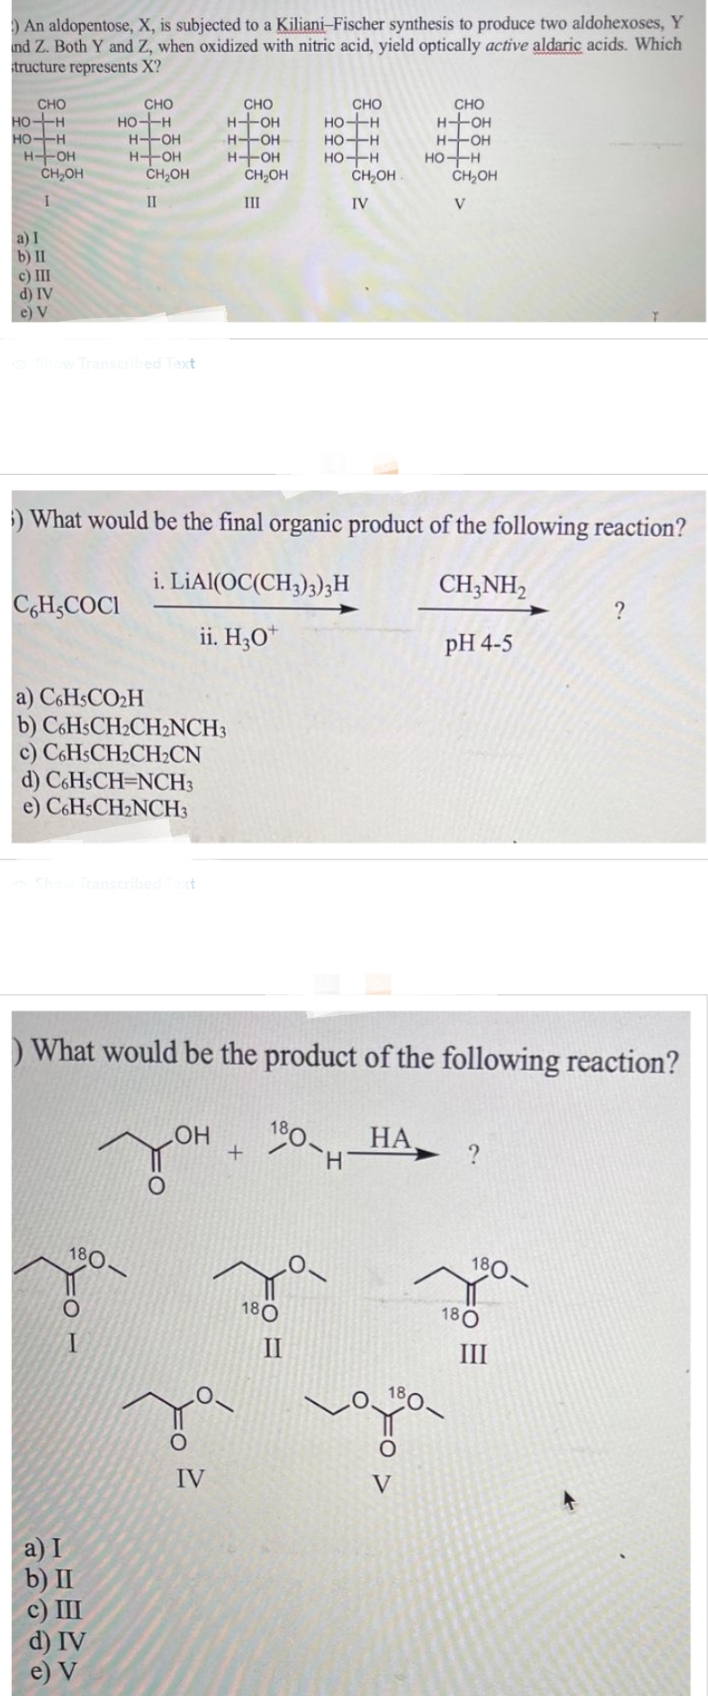 ) An aldopentose, X, is subjected to a Kiliani-Fischer synthesis to produce two aldohexoses, Y
und Z. Both Y and Z, when oxidized with nitric acid, yield optically active aldaric acids. Which
structure represents X?
CHO
HO+H
HO-H
H-OH
CH₂OH
I
a) I
b) II
c) III
d) IV
e) V
CHO
HO-H
vo Show Transcribed Text
C6H,COCI
H-OH
H-OH
CH₂OH
II
a) C6H5CO₂H
b) C6HsCH₂CH₂NCH3
c) C6HsCH₂CH₂CN
d) C6HSCH-NCH3
e) C6HsCH₂NCH3
Show Transcribed Text
40-
180-
I
a) I
b) II
c) III
d) IV
e) V
) What would be the final organic product of the following reaction?
i. LiAl(OC(CH3)3)3 H
CH3NH₂
ii. H30
pH 4-5
O
CHO
H+OH
H-OH
H-OH
LOH
O
CH₂OH
III
) What would be the product of the following reaction?
180-н
IV
+
CHO
HO-H
HO-H
HO-H
180
CH₂OH
IV
II
CHO
H-OH
H-OH
HA
HO-H
V
CH₂OH
V
?
180-
180
?
III